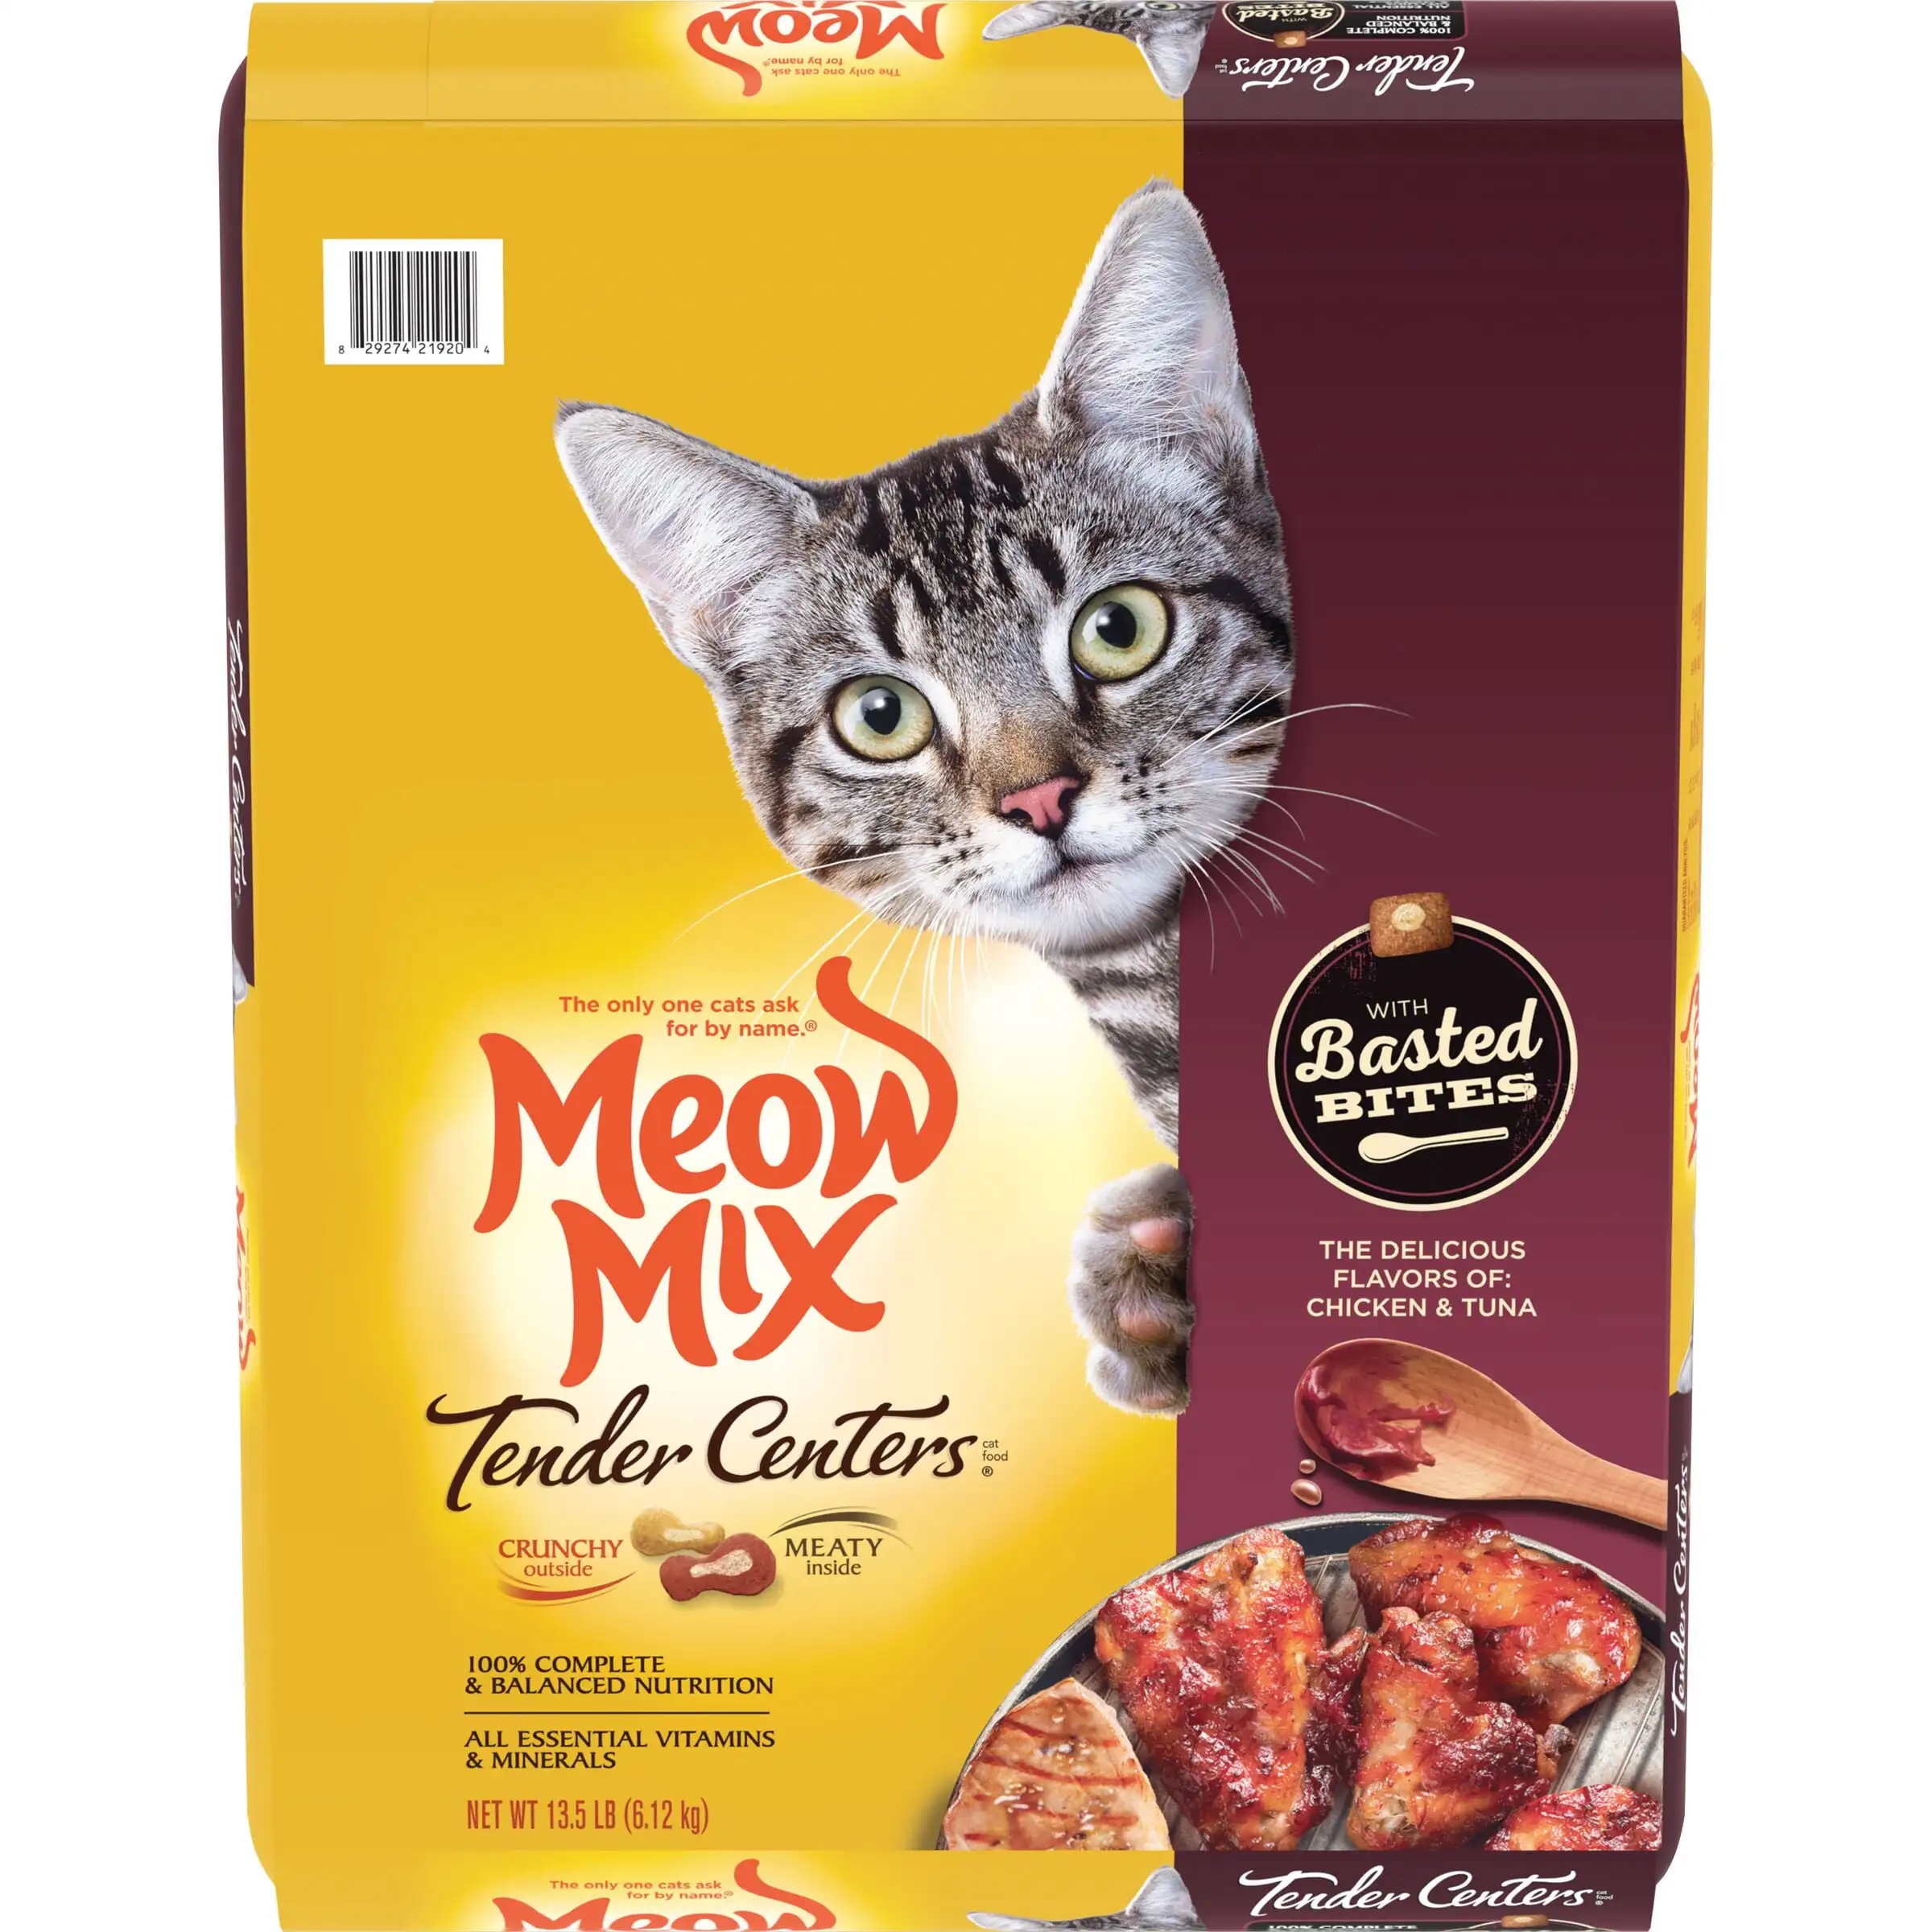 

Meow Mix Tender Centers with Basted Bites, Chicken and Tuna Flavored Dry Cat Food, 13.5-Pound